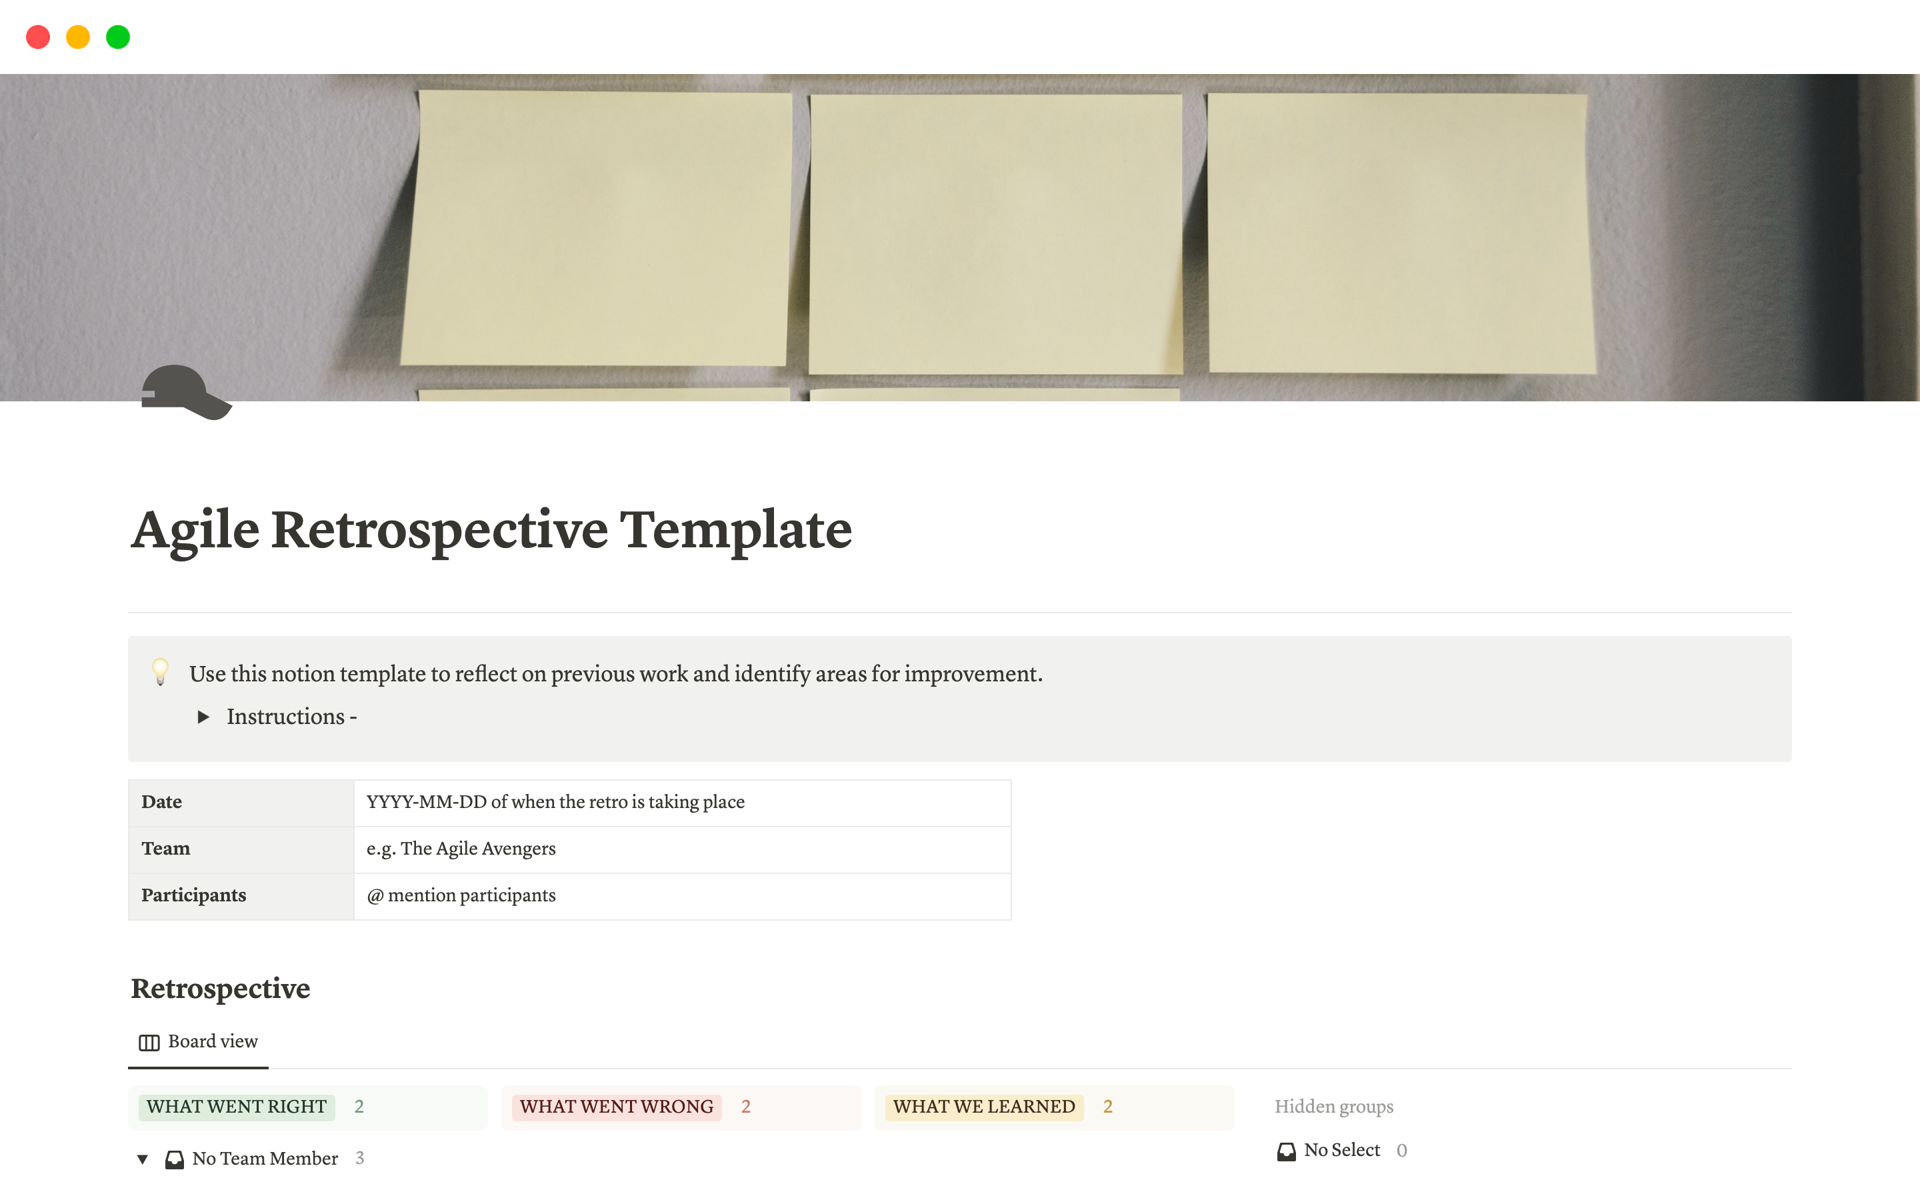 Running Agile Retrospective remotely? Use this free Agile Retrospective template to guide the conversation and capture your session’s output.
